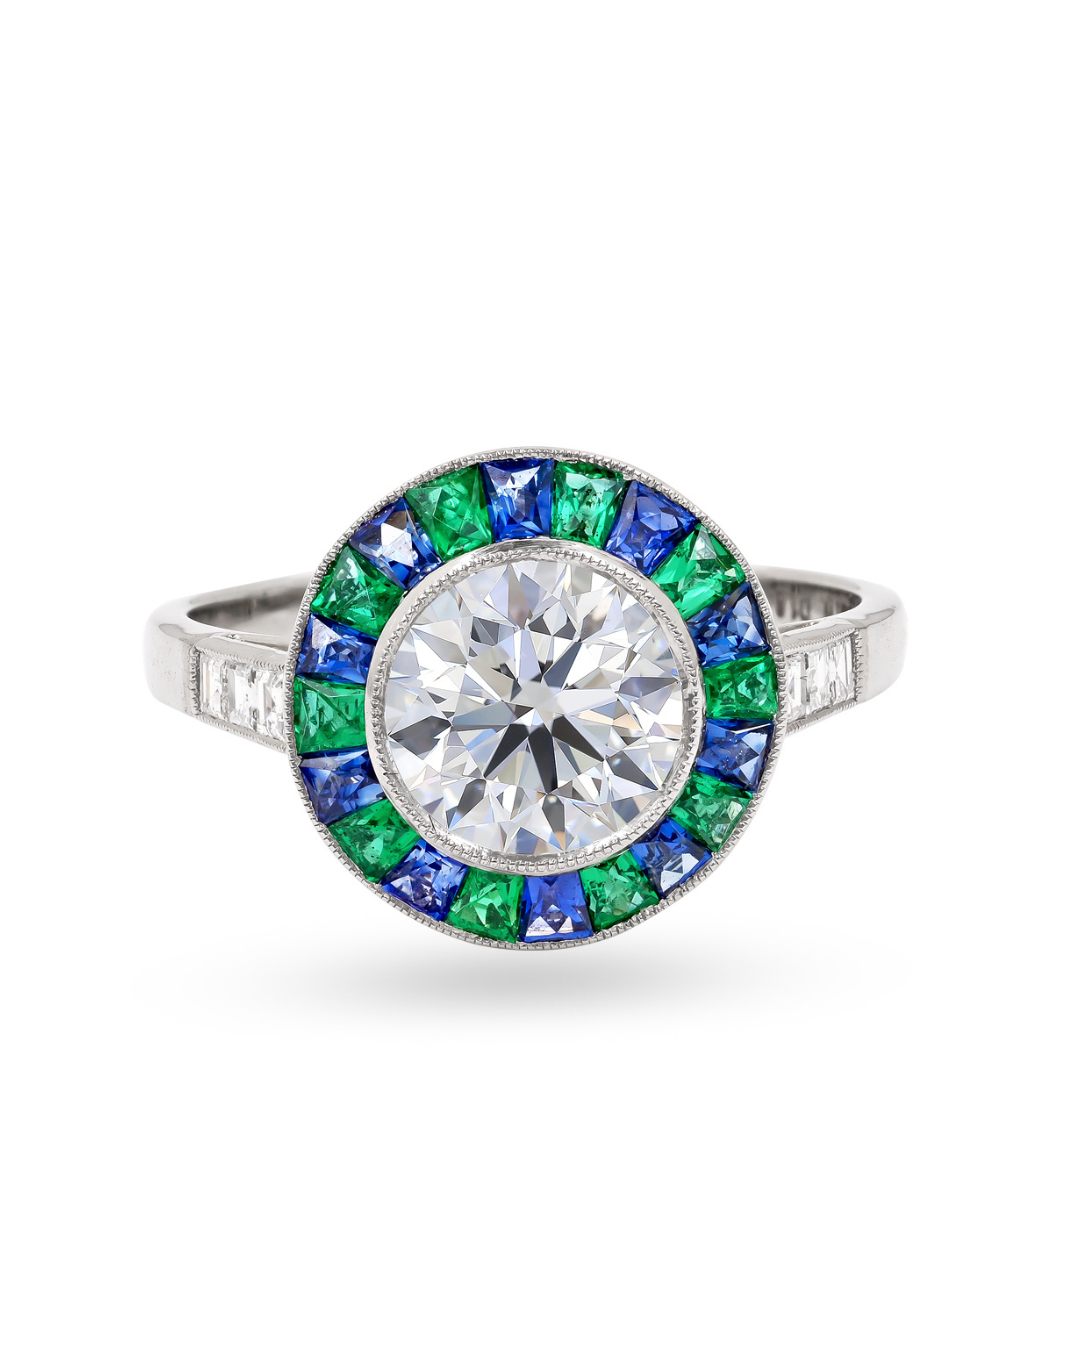 Sophia D. Round Diamond Ring with Alternating French Cut Emeralds and Blue Sapphires